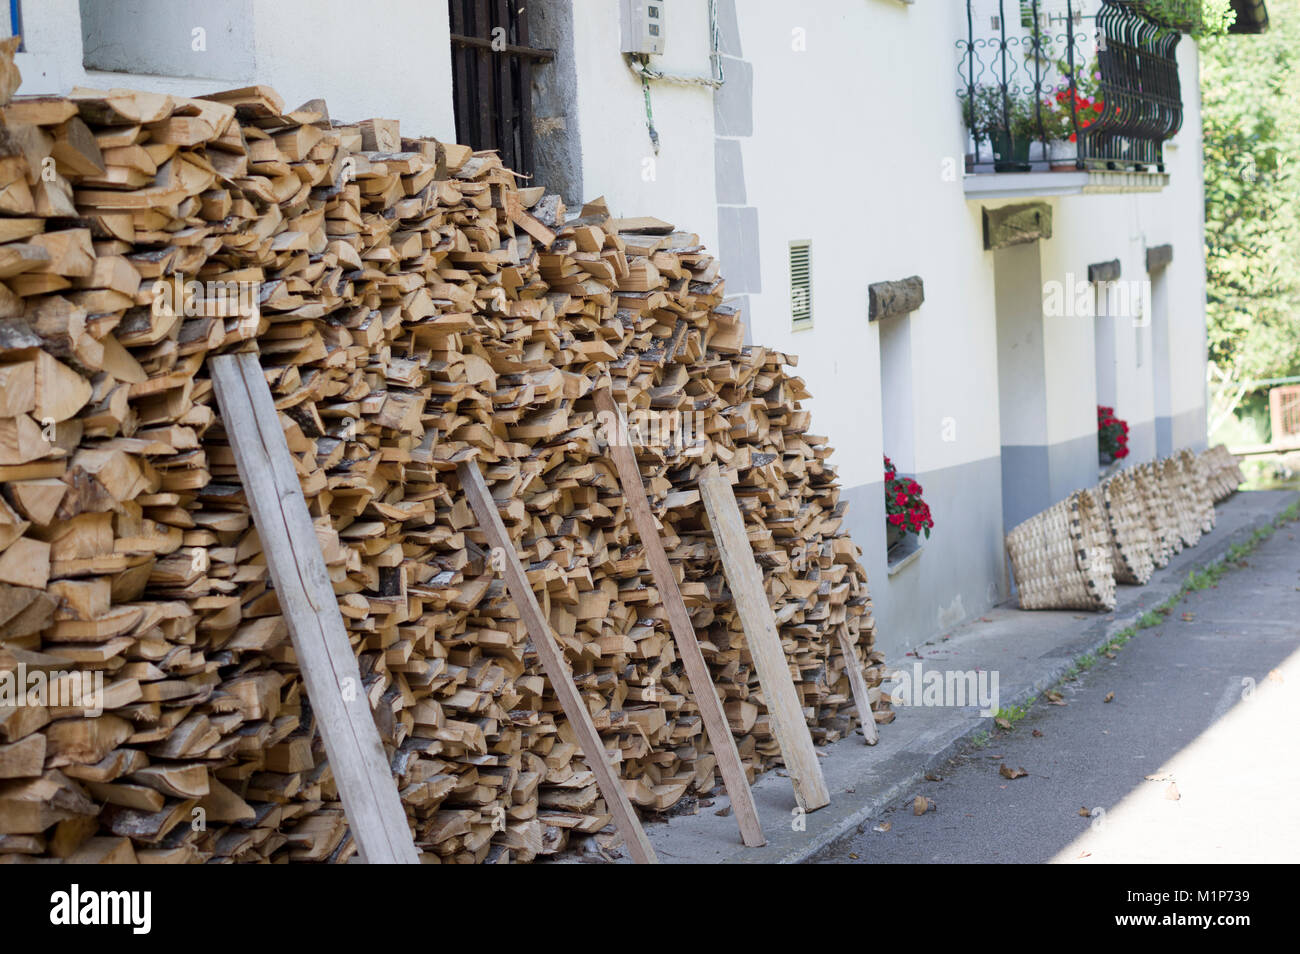 Firewood in a Contry-house, Matxinbenta, Gipuzkoa province, Basque Country, Spain, Europe Stock Photo